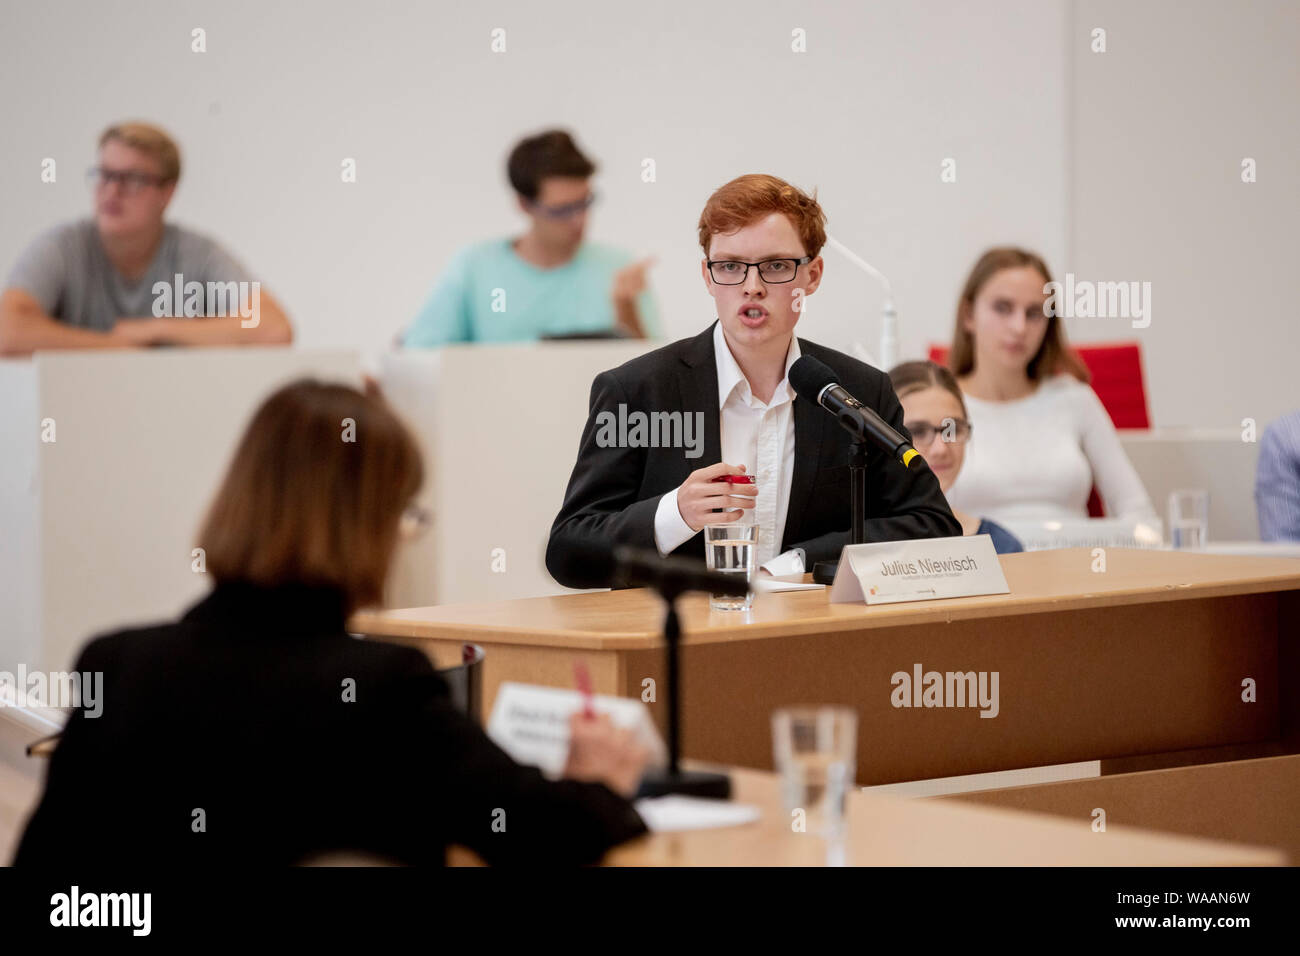 19 August 2019, Brandenburg, Potsdam: Julius Niewisch, student at Humboldt-Gymnasium Potsdam, speaks at the event 'Jugend debattiert mit Spitzenkandidaten' ('Youth debates with top candidates') at the state election Brandenburg in the plenary hall of the state parliament from Brandenburg to Ursula Nonnemacher (l, from behind), top candidate of Bündnis 90/Die Grünen Brandenburg for the state election. At the event, which will take place within the framework of the 2019 junior elections, the top candidates of the five parties represented in the Brandenburg state parliament in parliamentary group Stock Photo